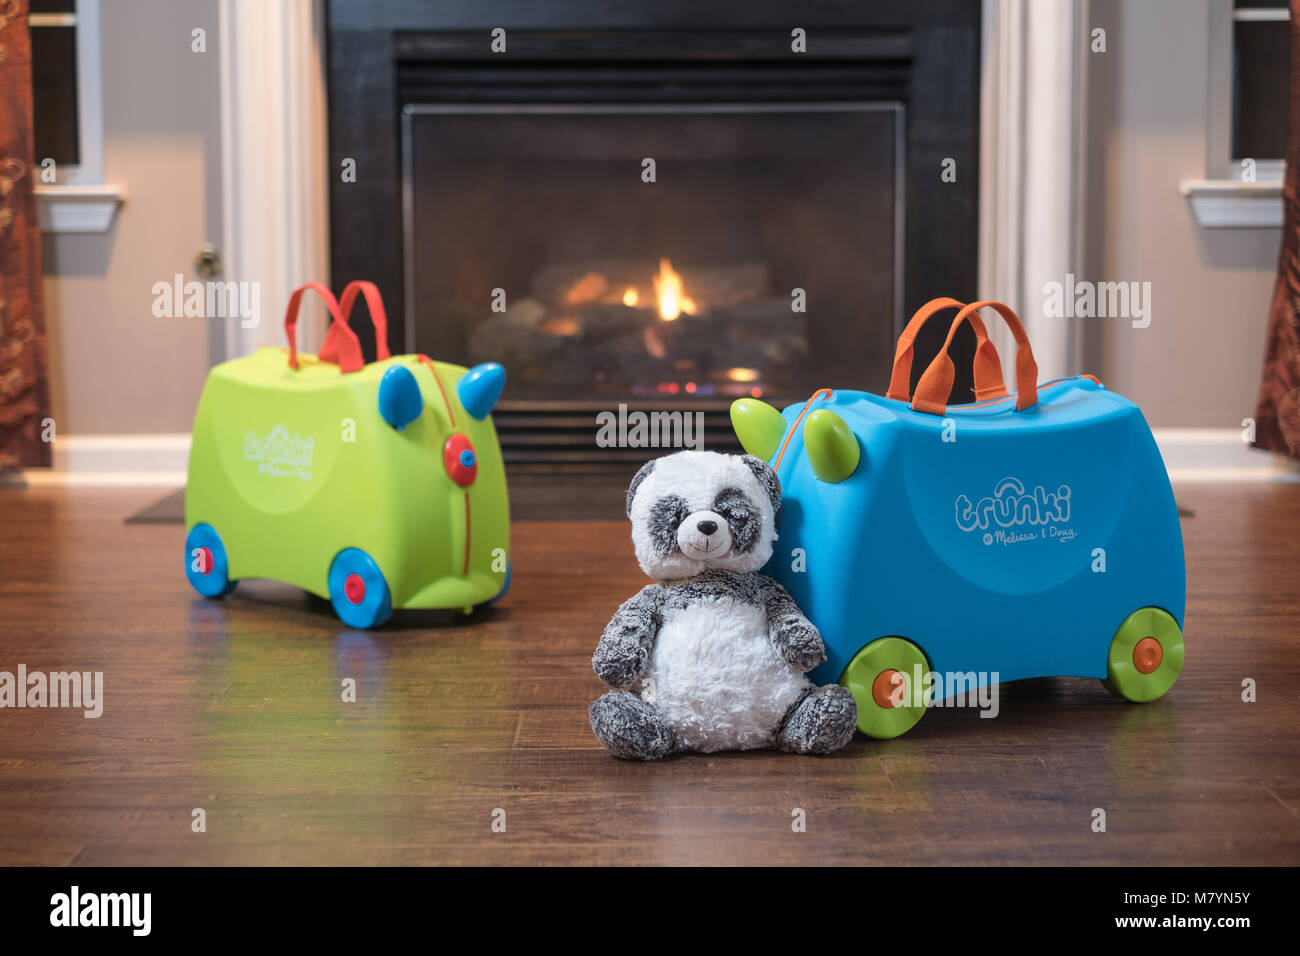 Trunki Ride-On Suitcase In Front of Home Fireplace Stock Photo